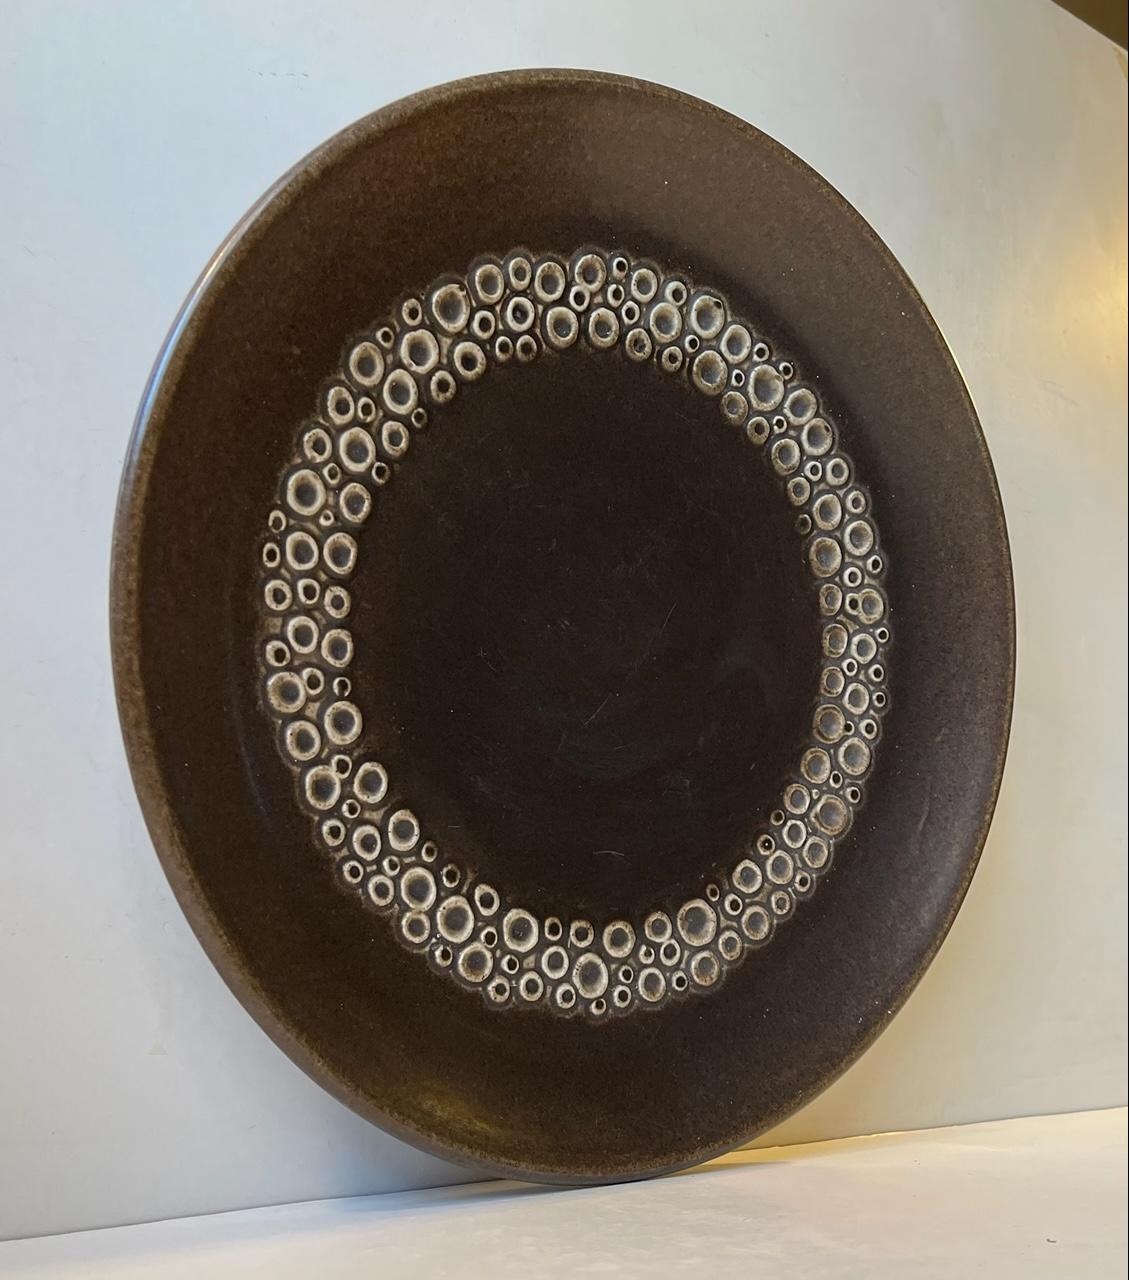 Glazed Pottery centerpiece dish or bowl by Frederik Ravnild. It features a circular decor mimicking the surface/texture of the Moons surface. Manufactured by Ravnild in Denmark during the 1970s. Unusual piece of Scandinavian Modern pottery.